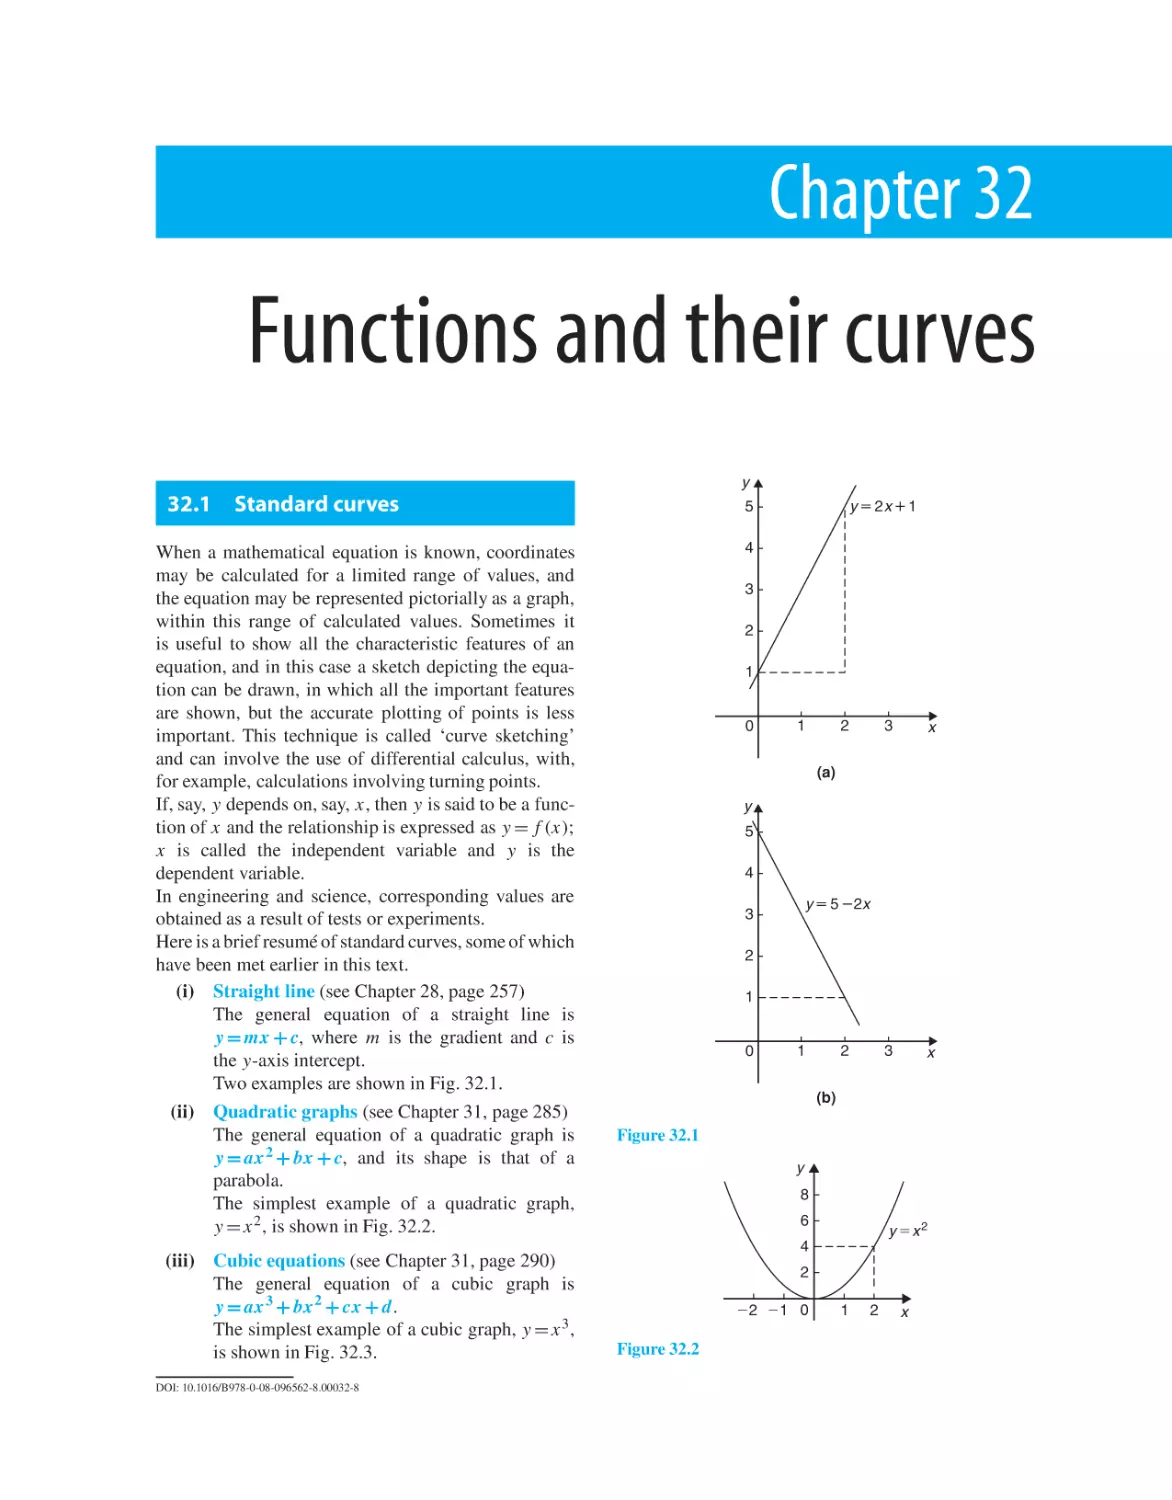 Chapter 32. Functions and their curves
32.1 Standard curves